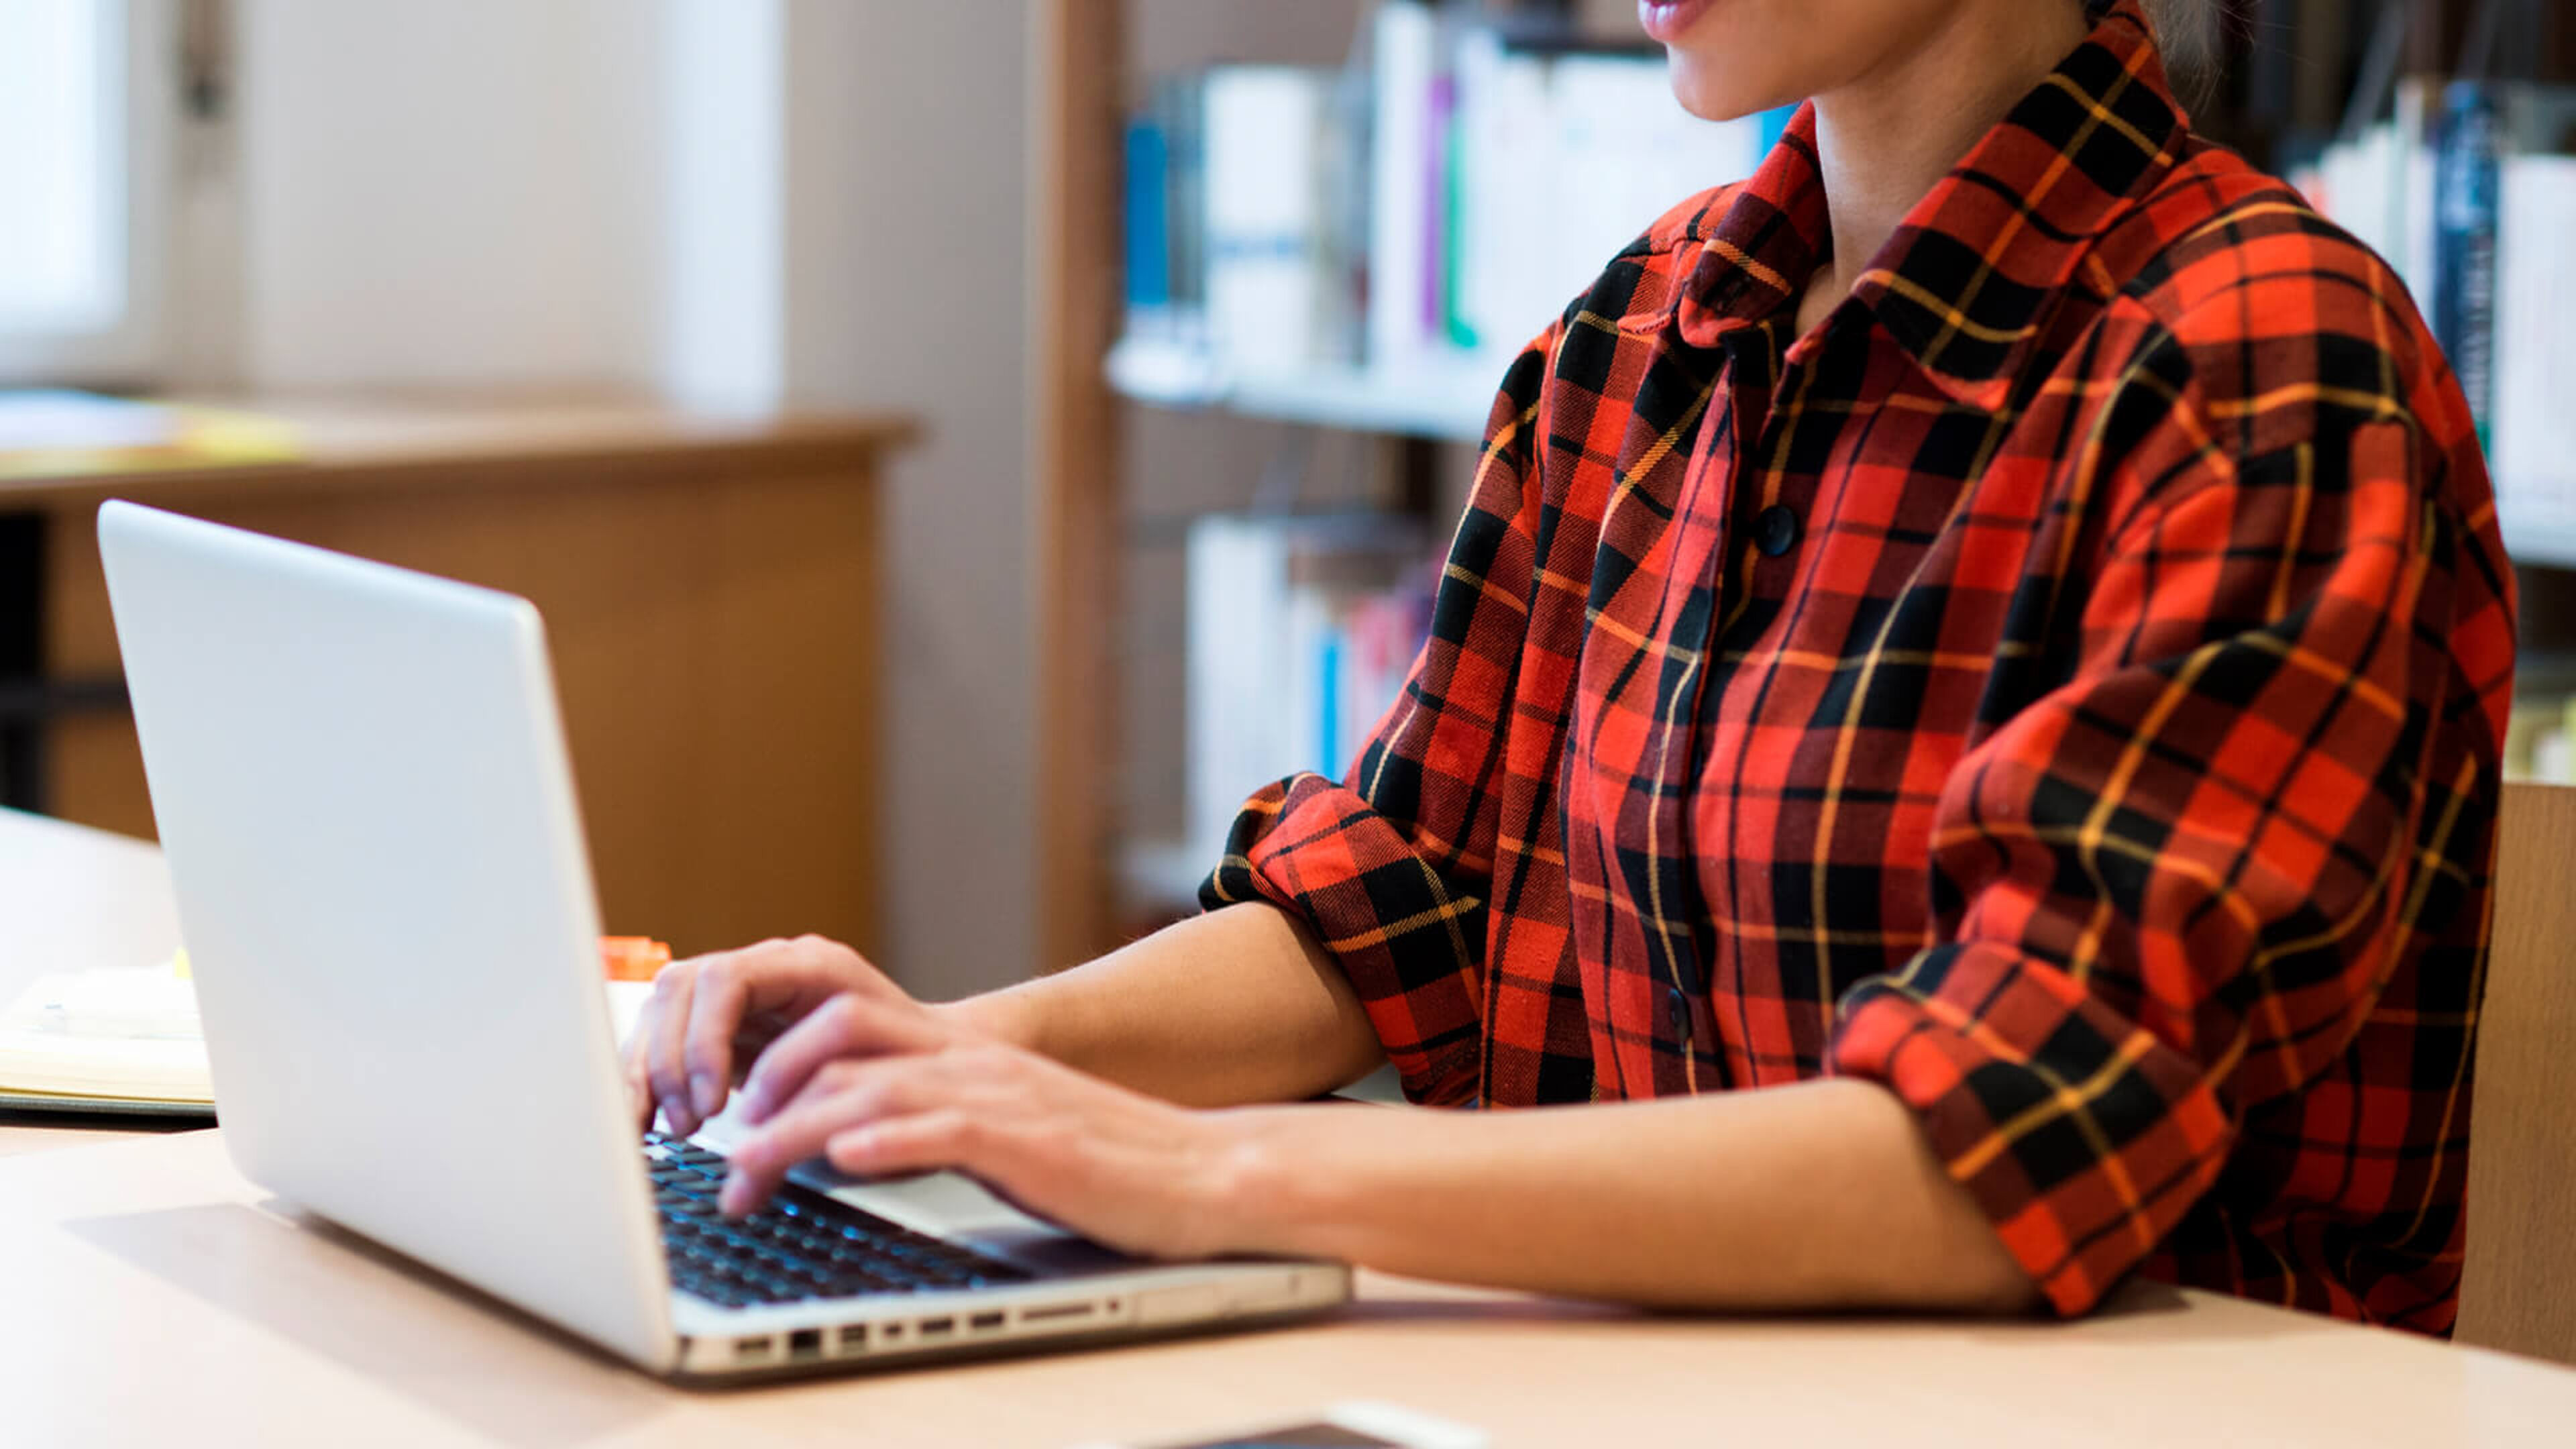 A focused individual in a red plaid shirt types on a laptop at a well-lit workspace, symbolizing productivity and the casual professional setting.